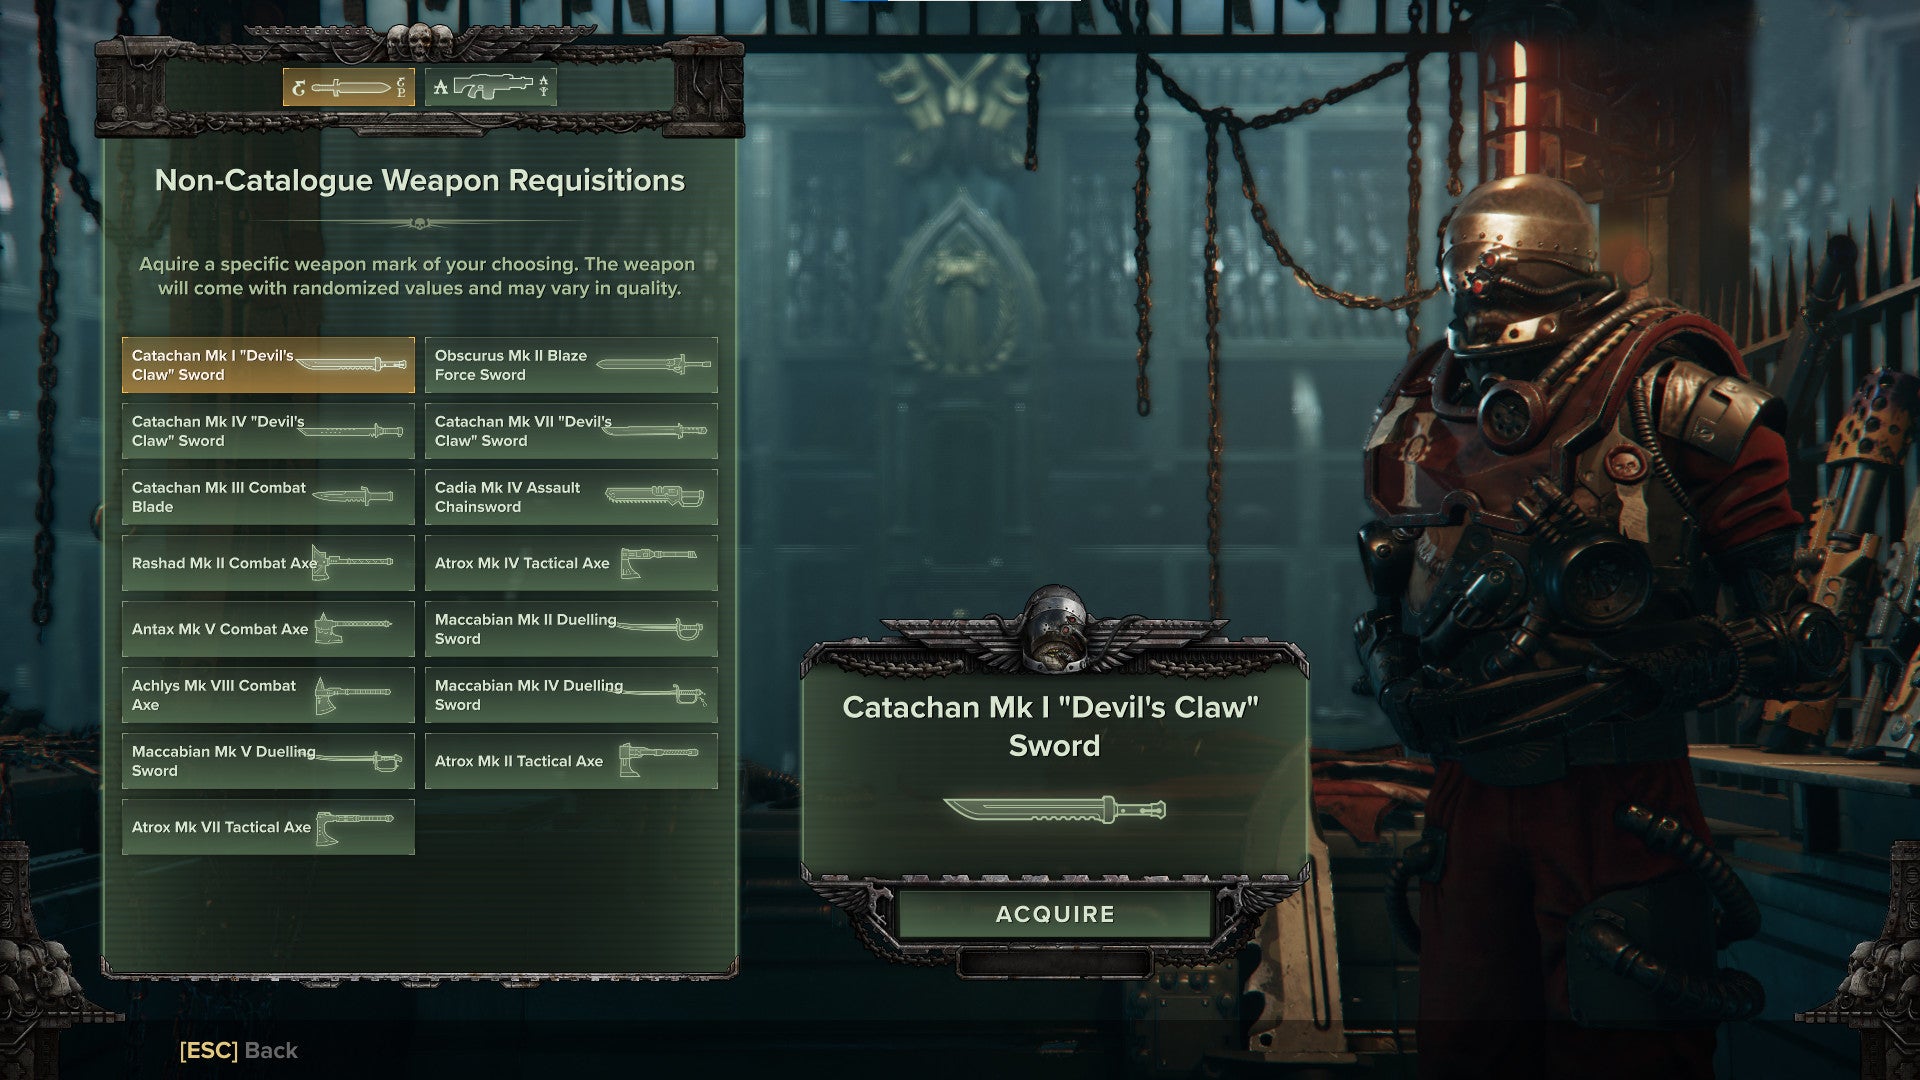 Buying common weapons in the the updated gear shop in a Warhammer 40,000: Darktide screenshot.